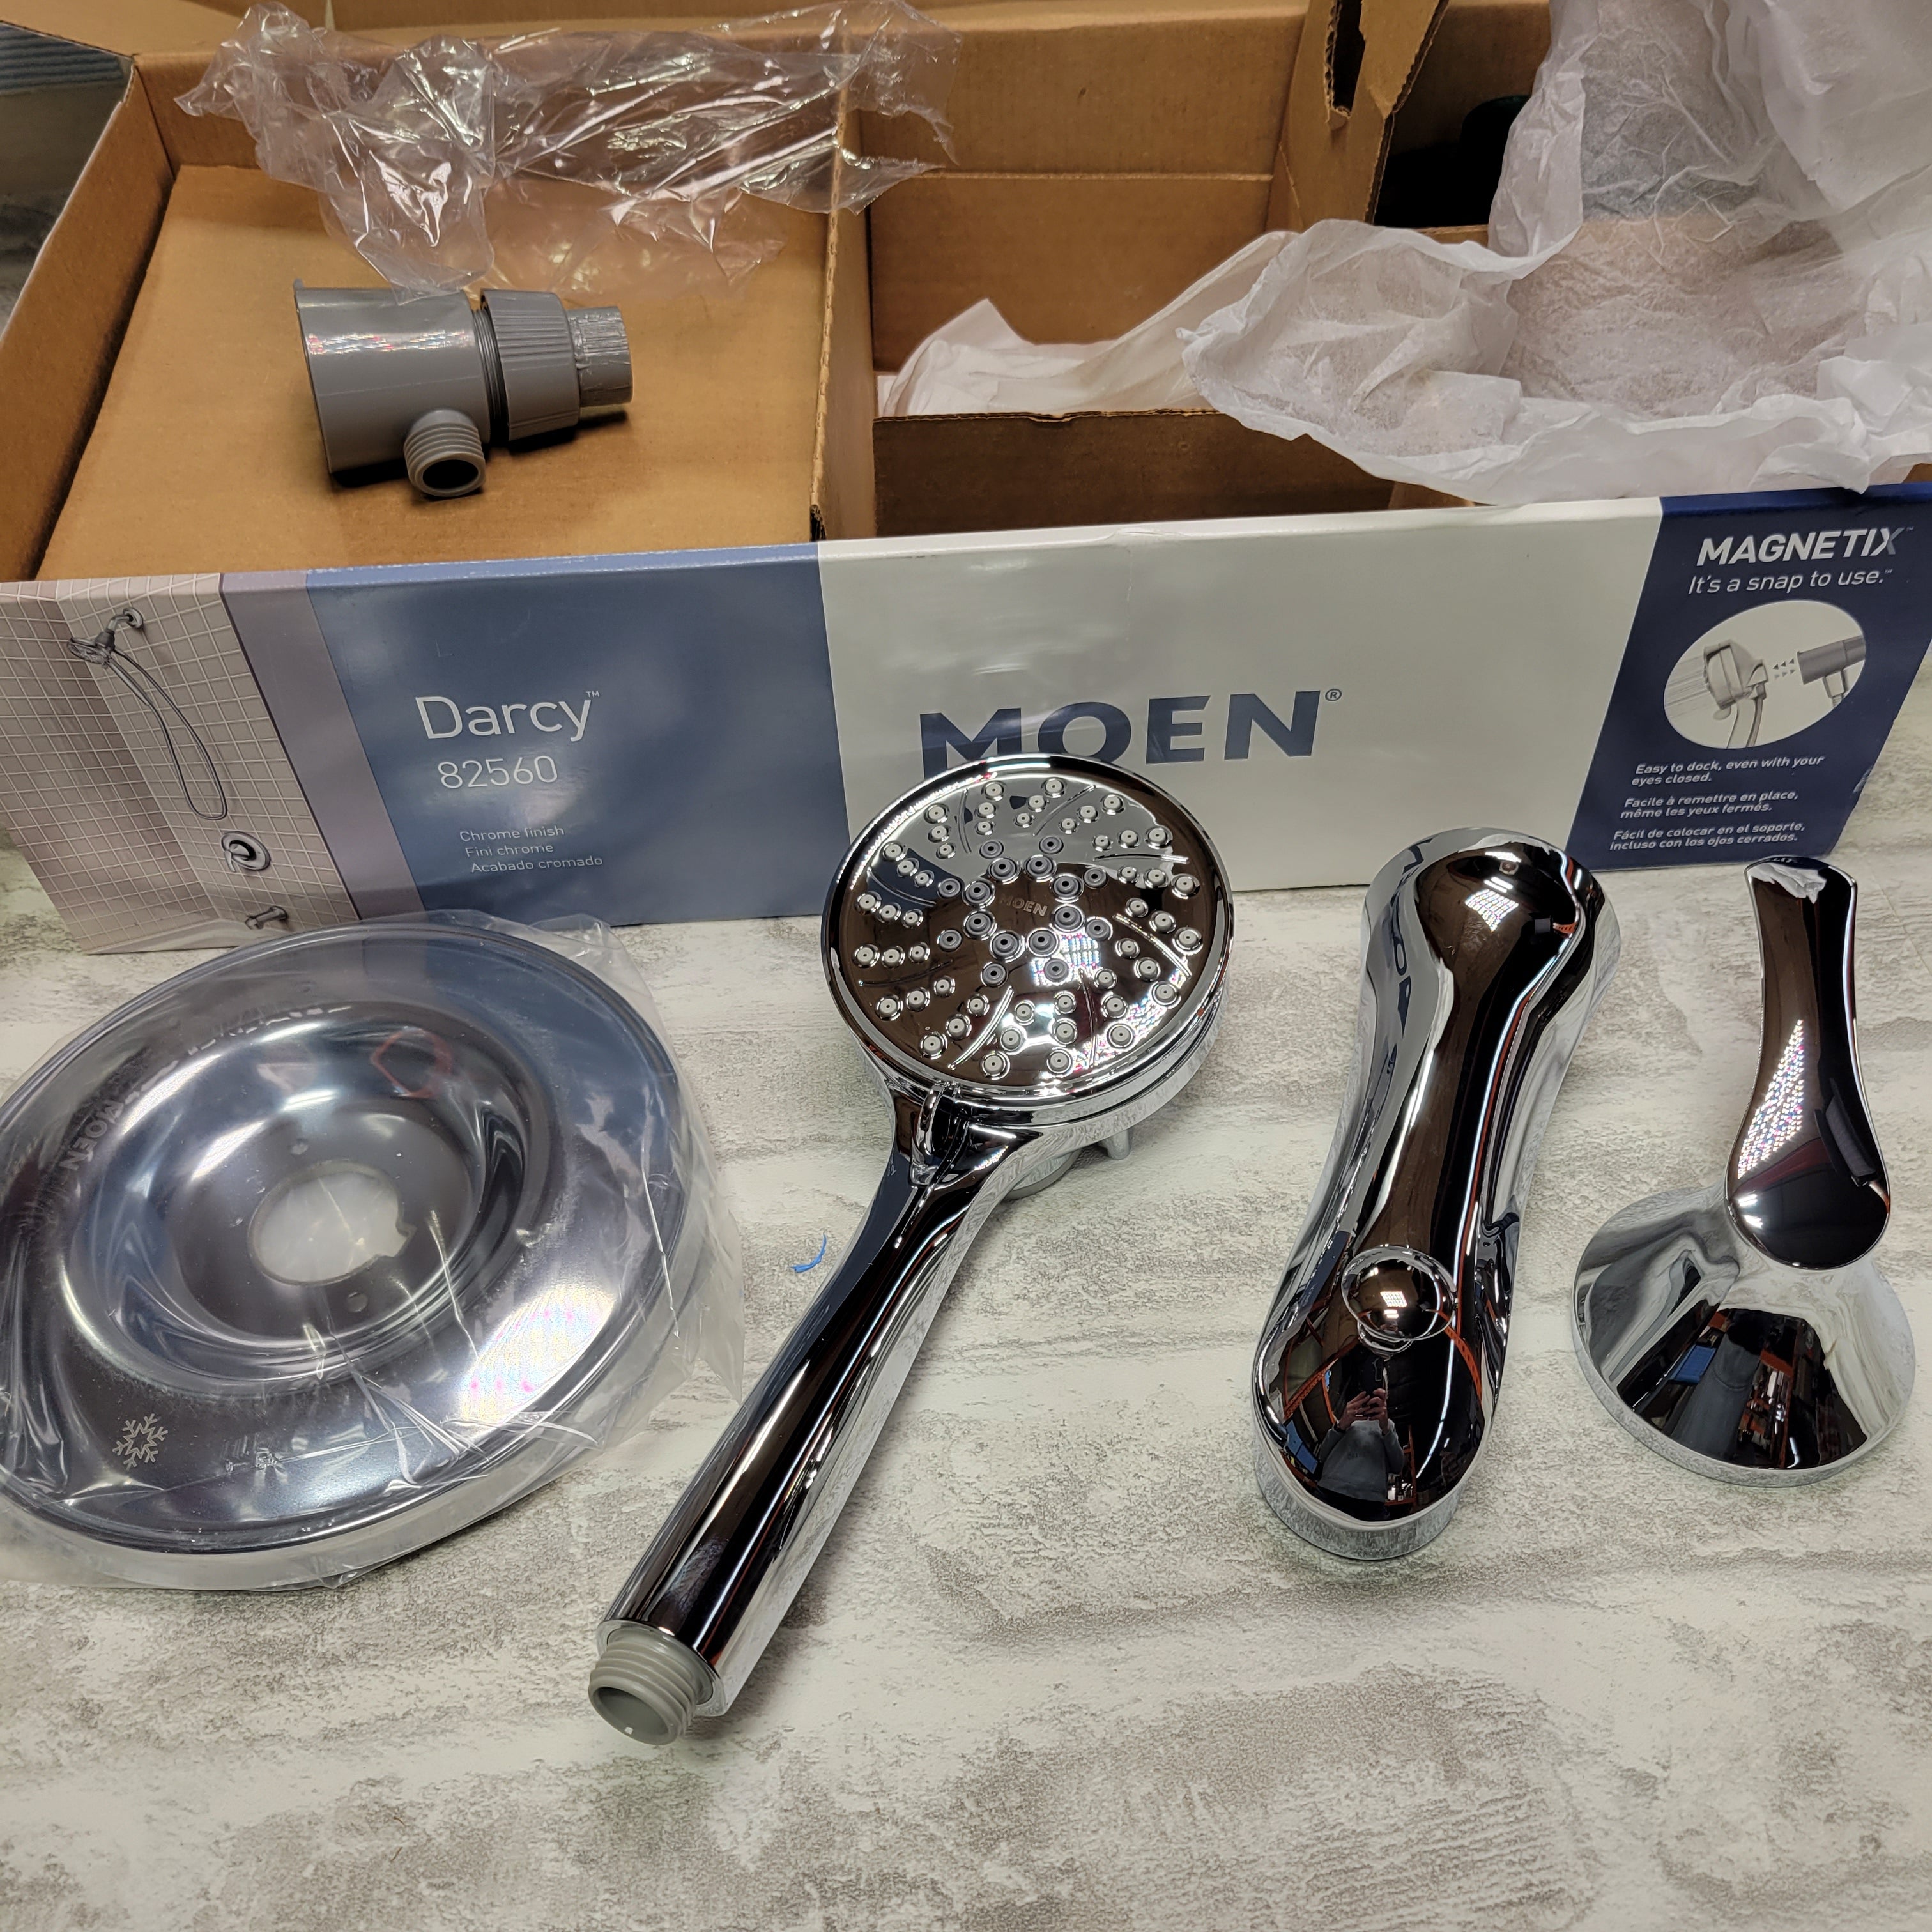 MOEN Darcy w/ Magnetix Single-Handle Tub/Shower Faucet - Chrome (Valve Included) (7626873209070)